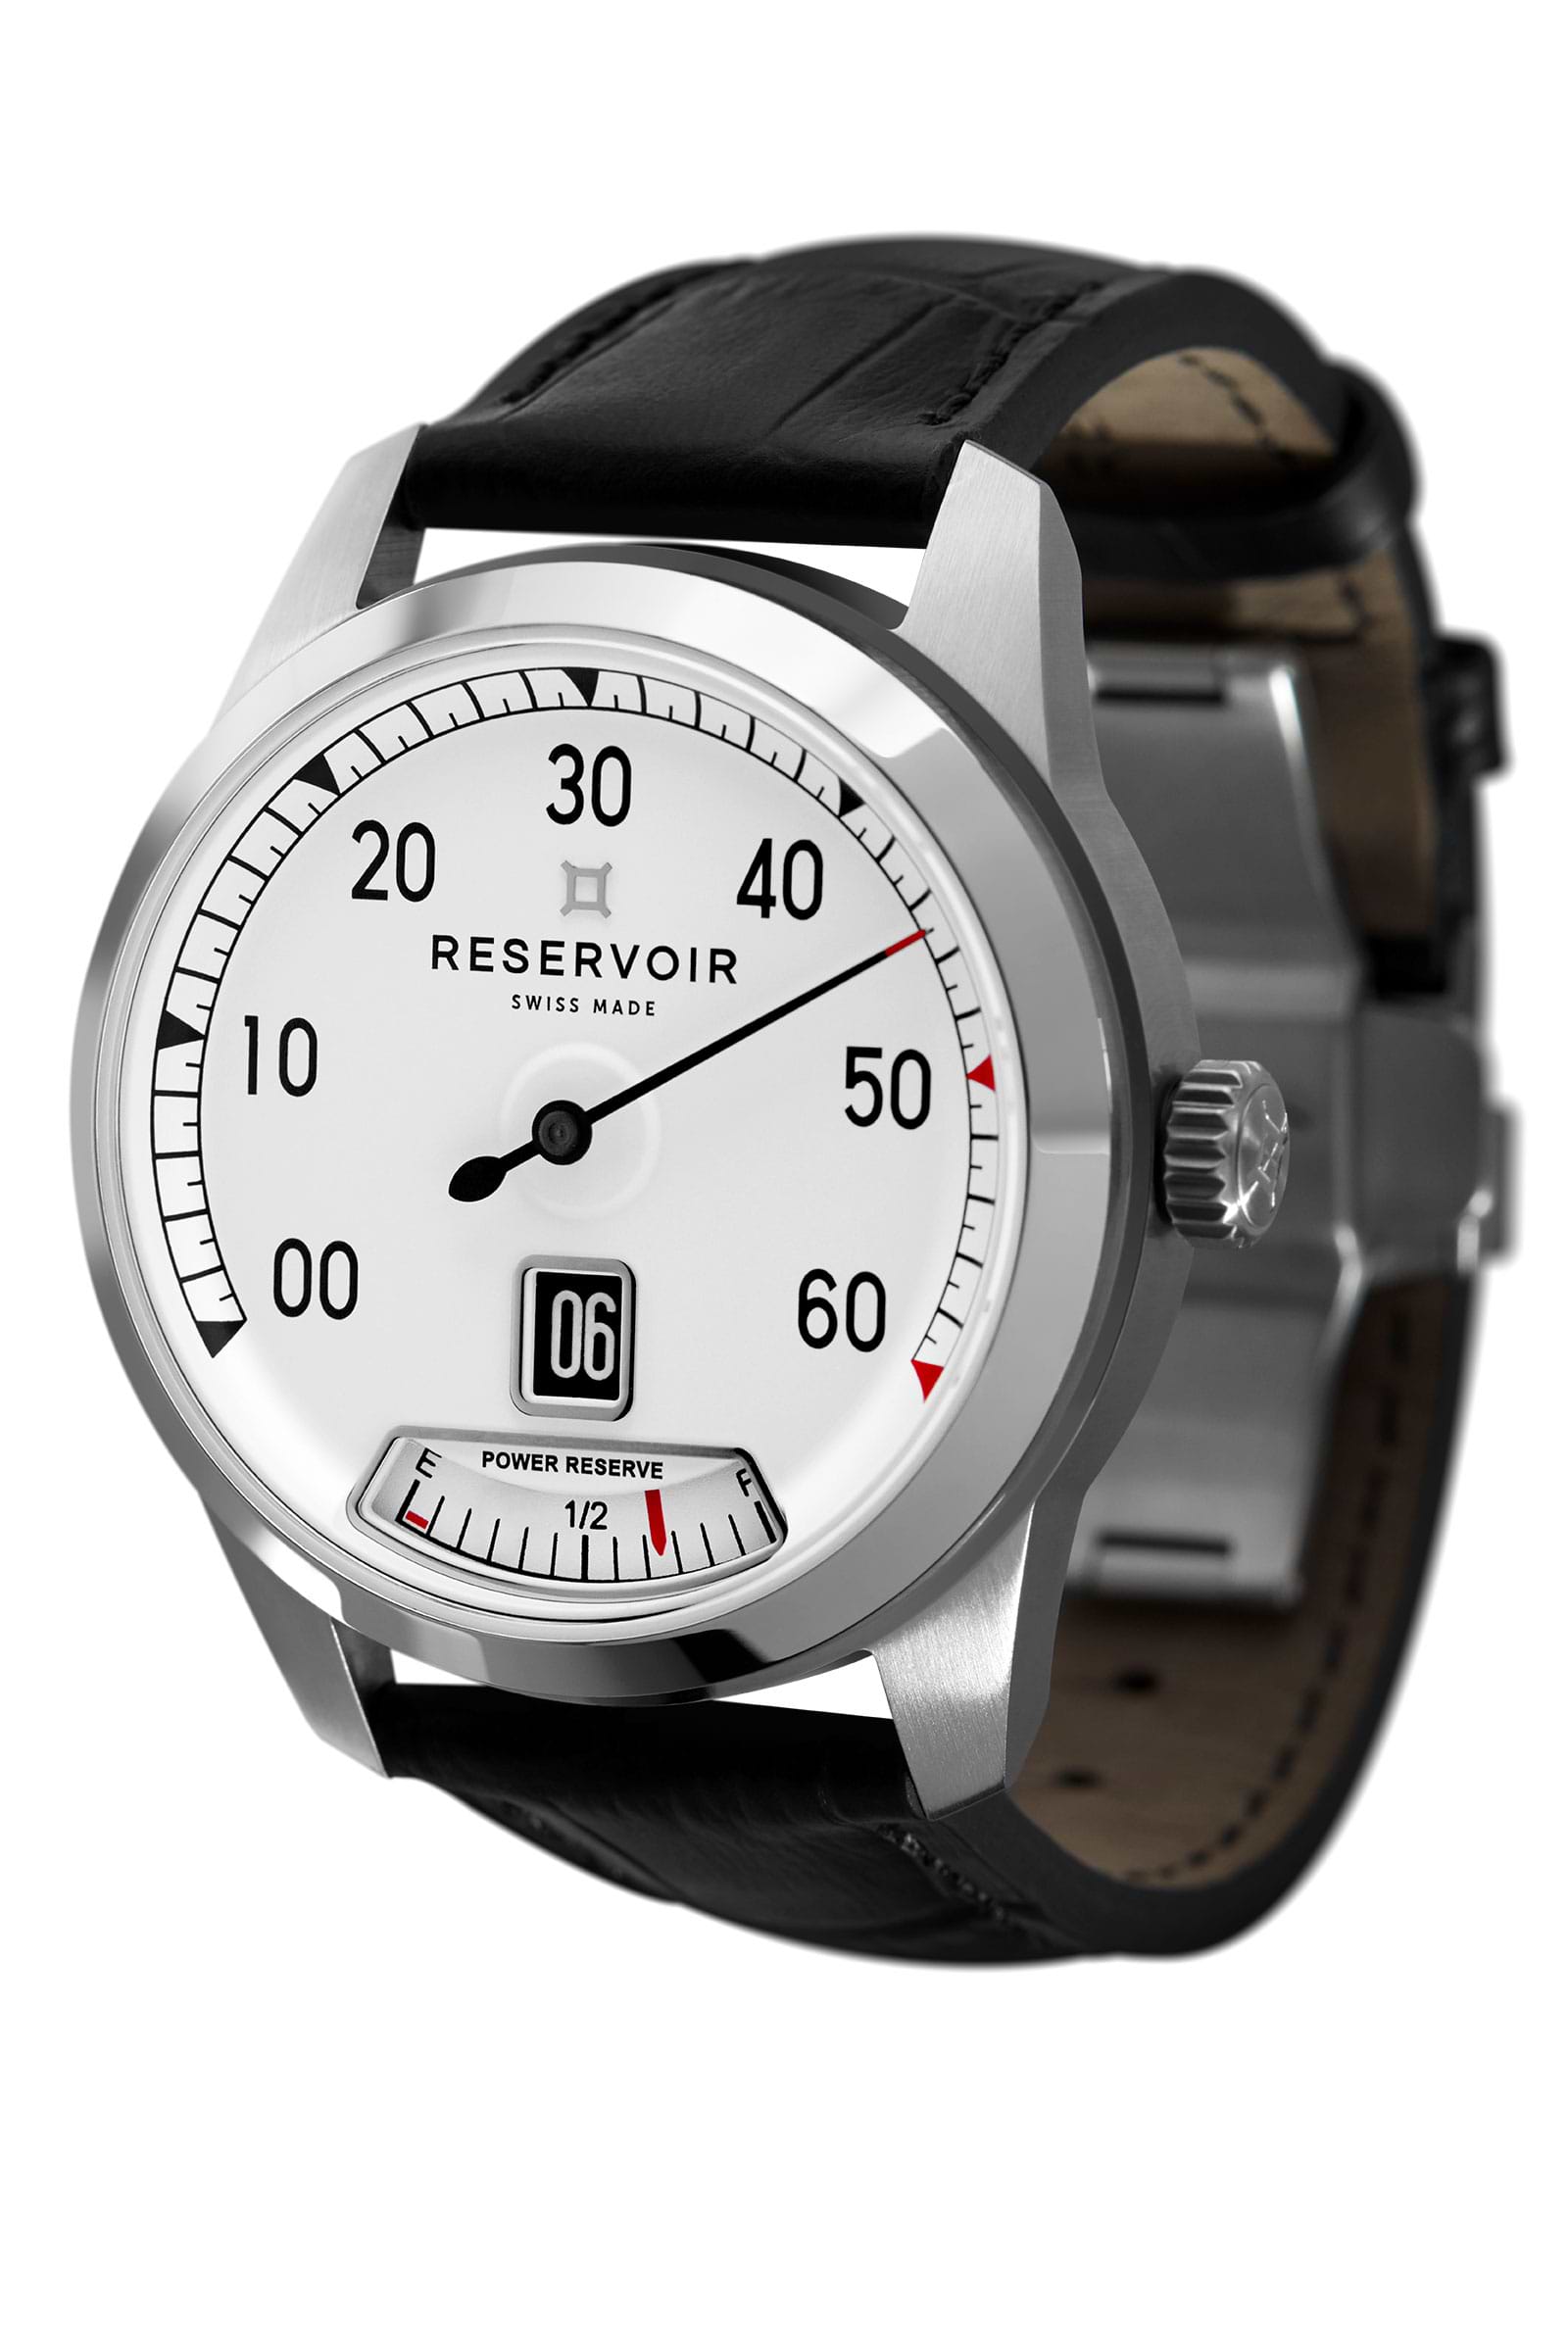 Vintage Car with Luxury RPM Counter and Watch in Dark black, Light Grey, and Medium Grey